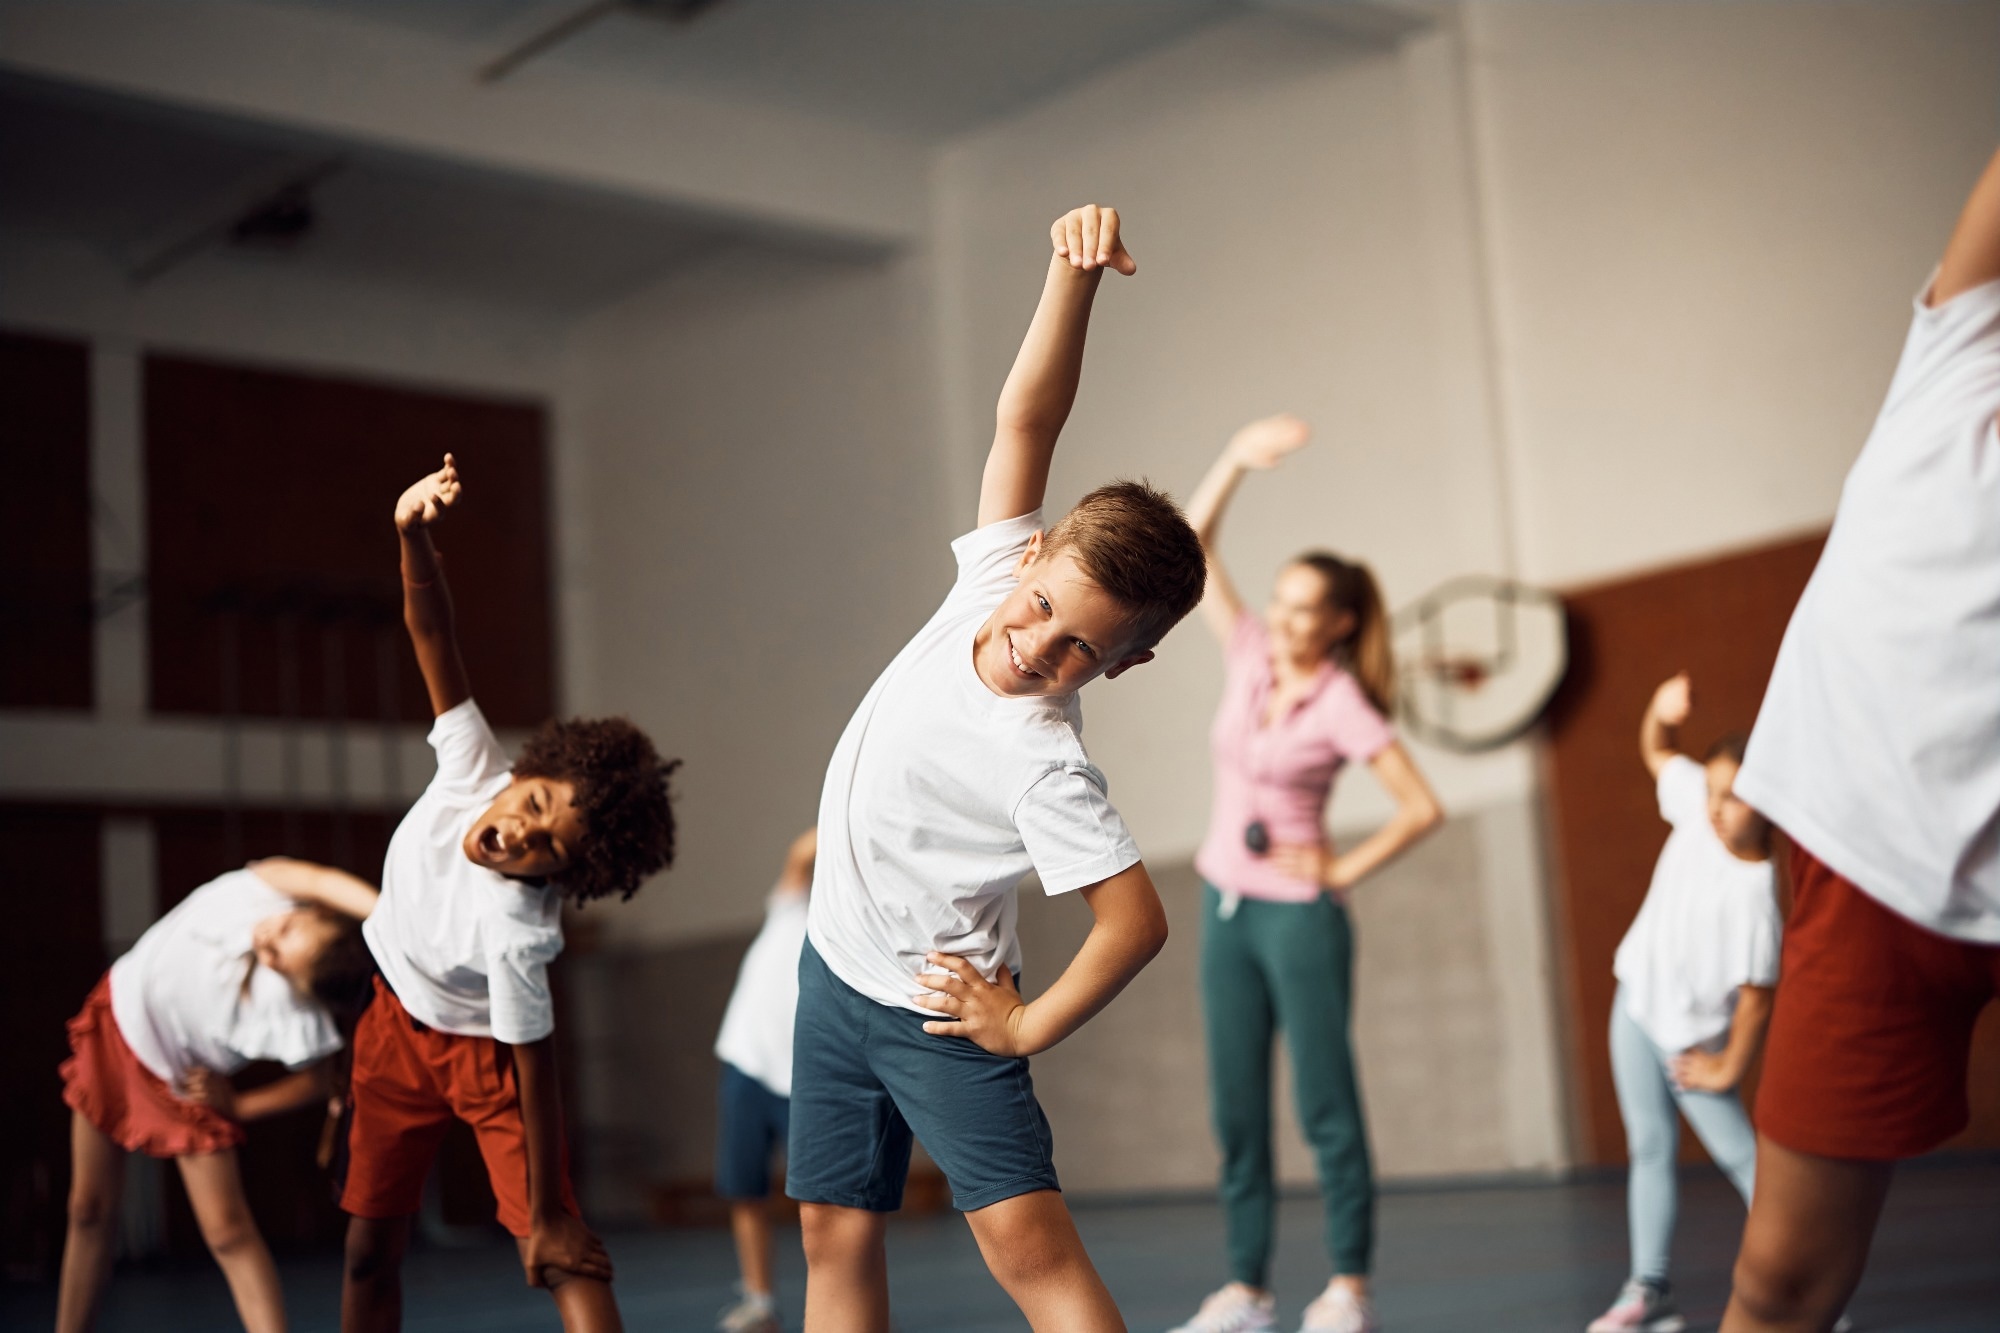 Effects of an Exercise Program on Cardiometabolic and Mental Health in Children With Overweight or Obesity A Secondary Analysis of a Randomized Clinical Trial